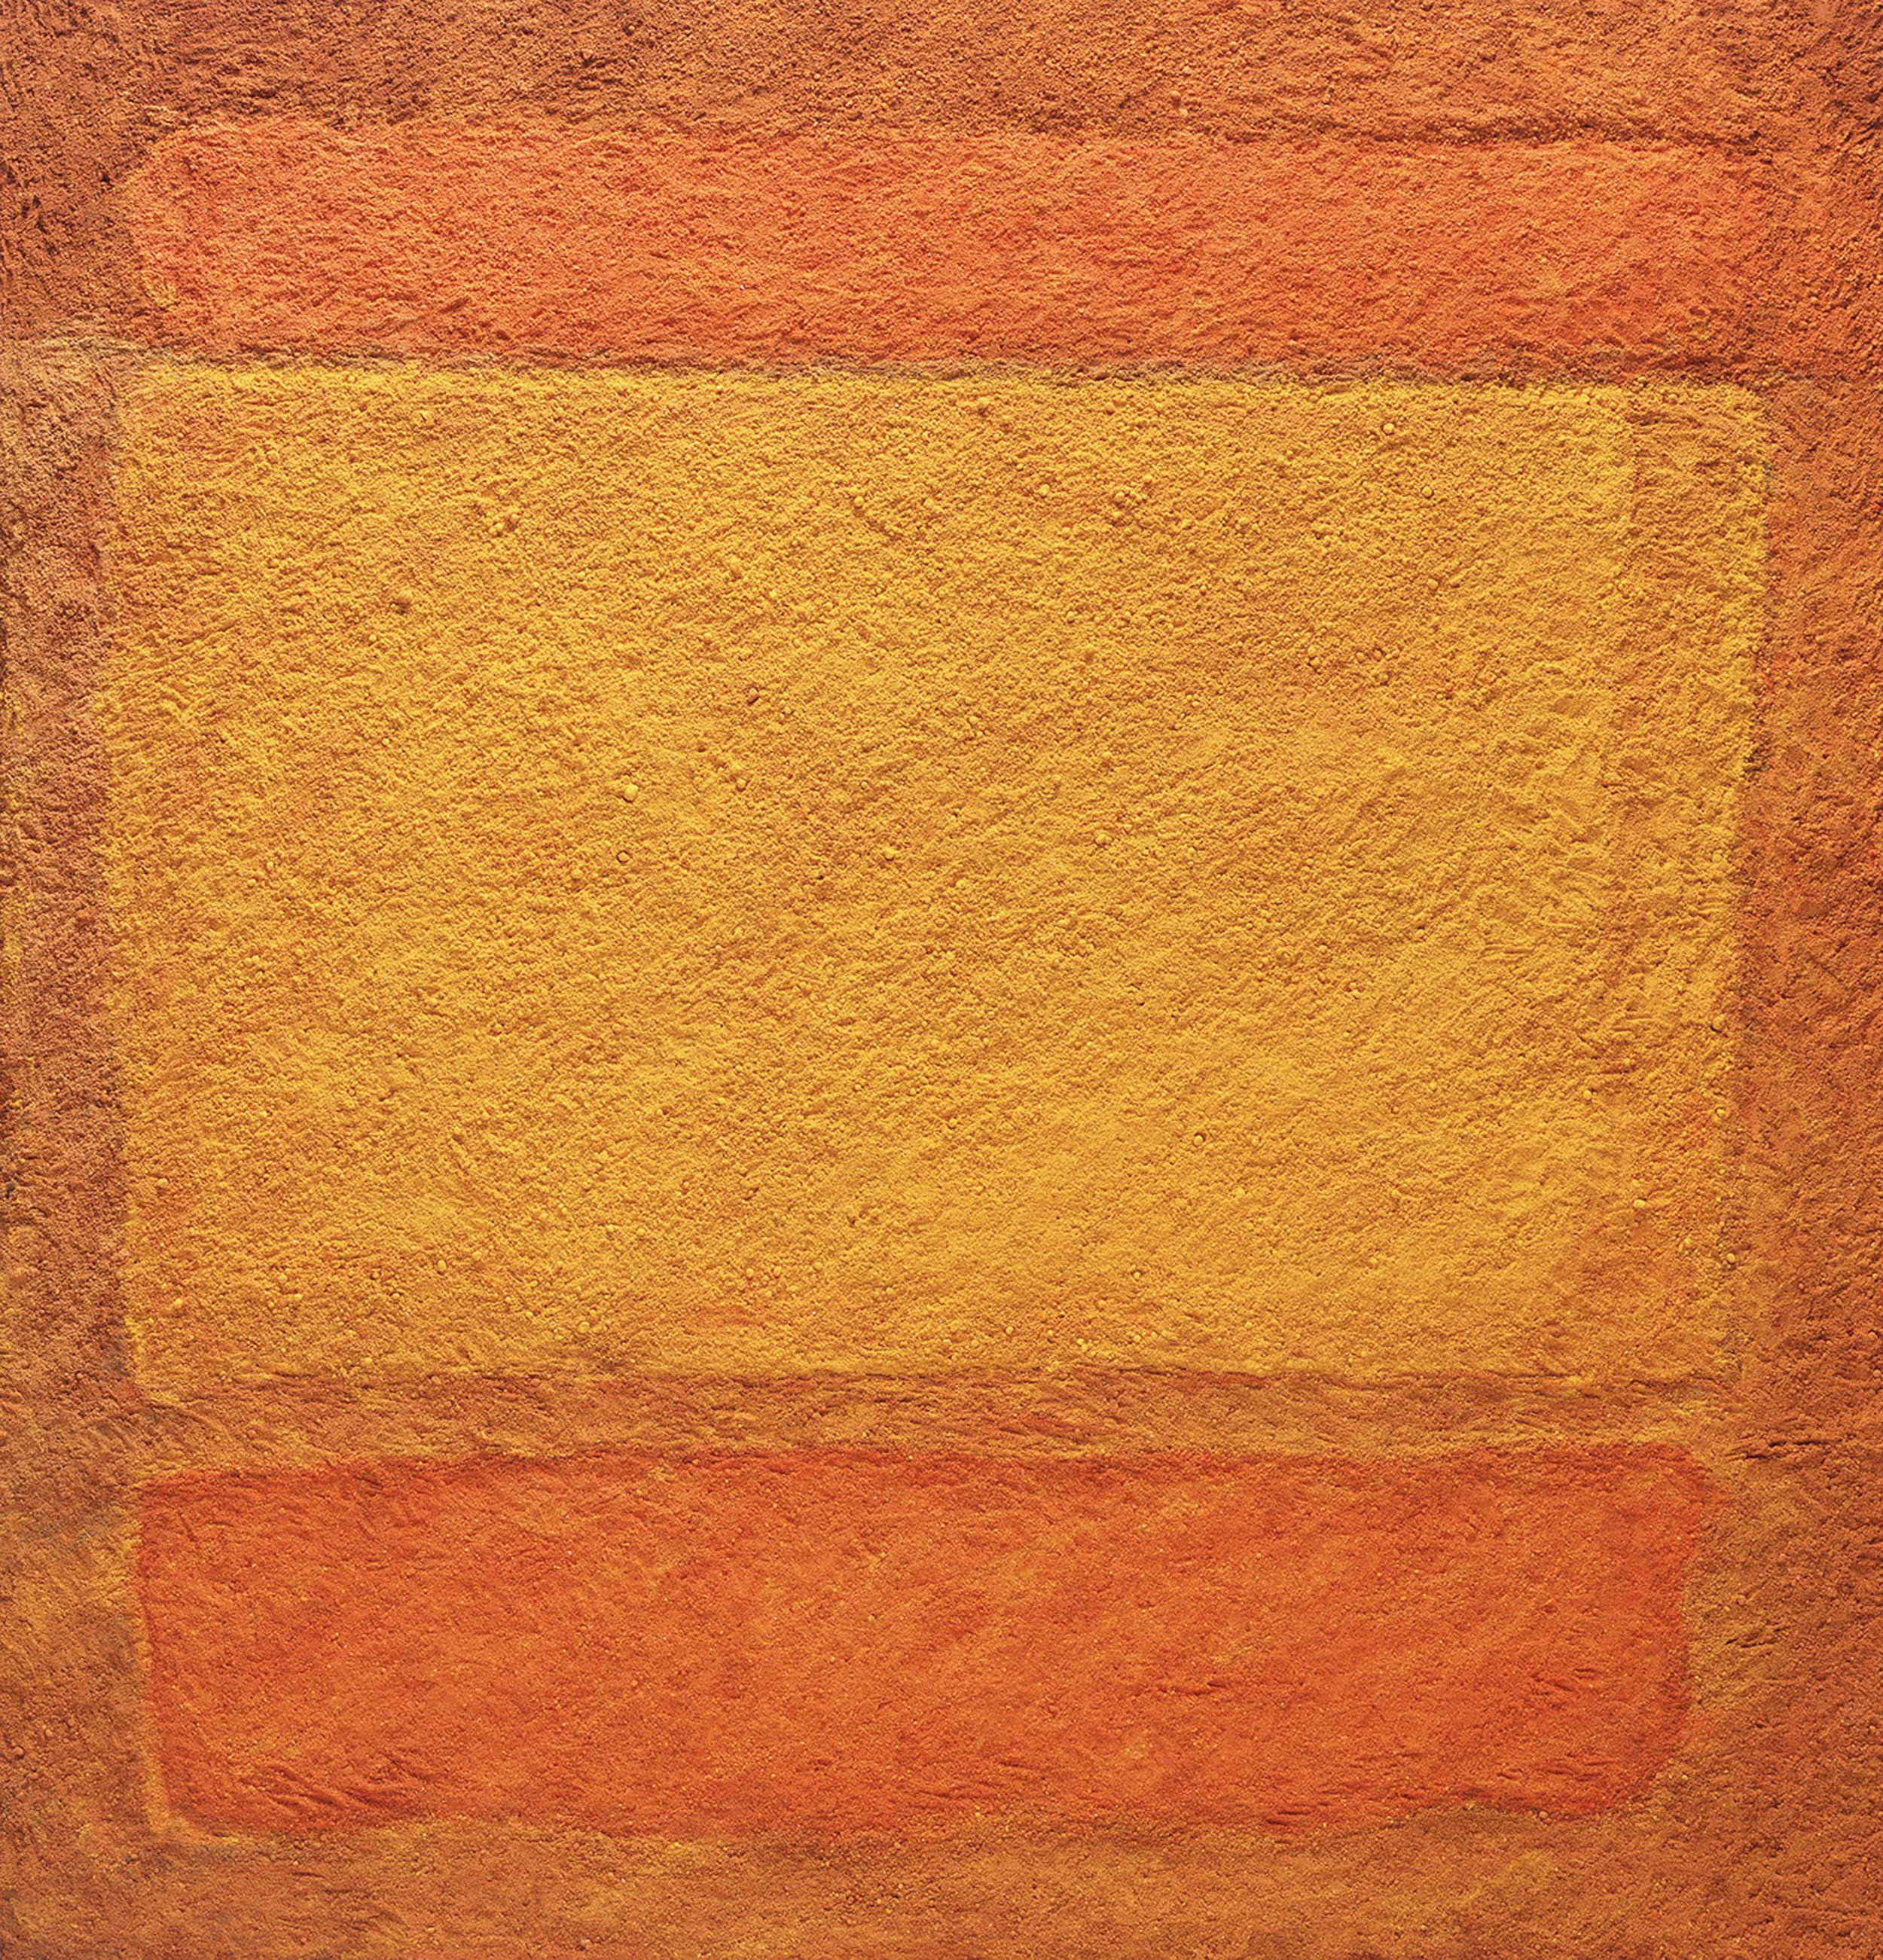 Red, Orange, Orange on Red, after Mark Rothko (Pictures of Pigment), 2008